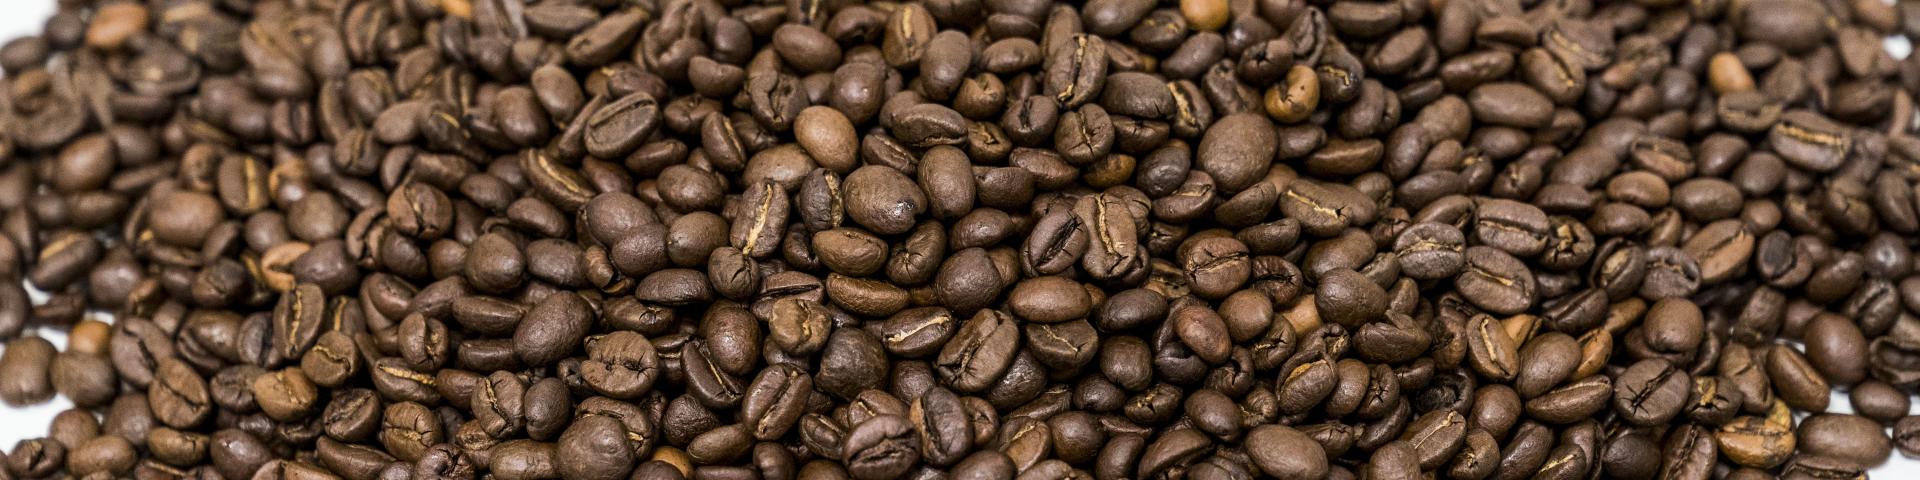 79 Types of Coffee (Definitive Guide) Drinks, Beans, Names, Roasts